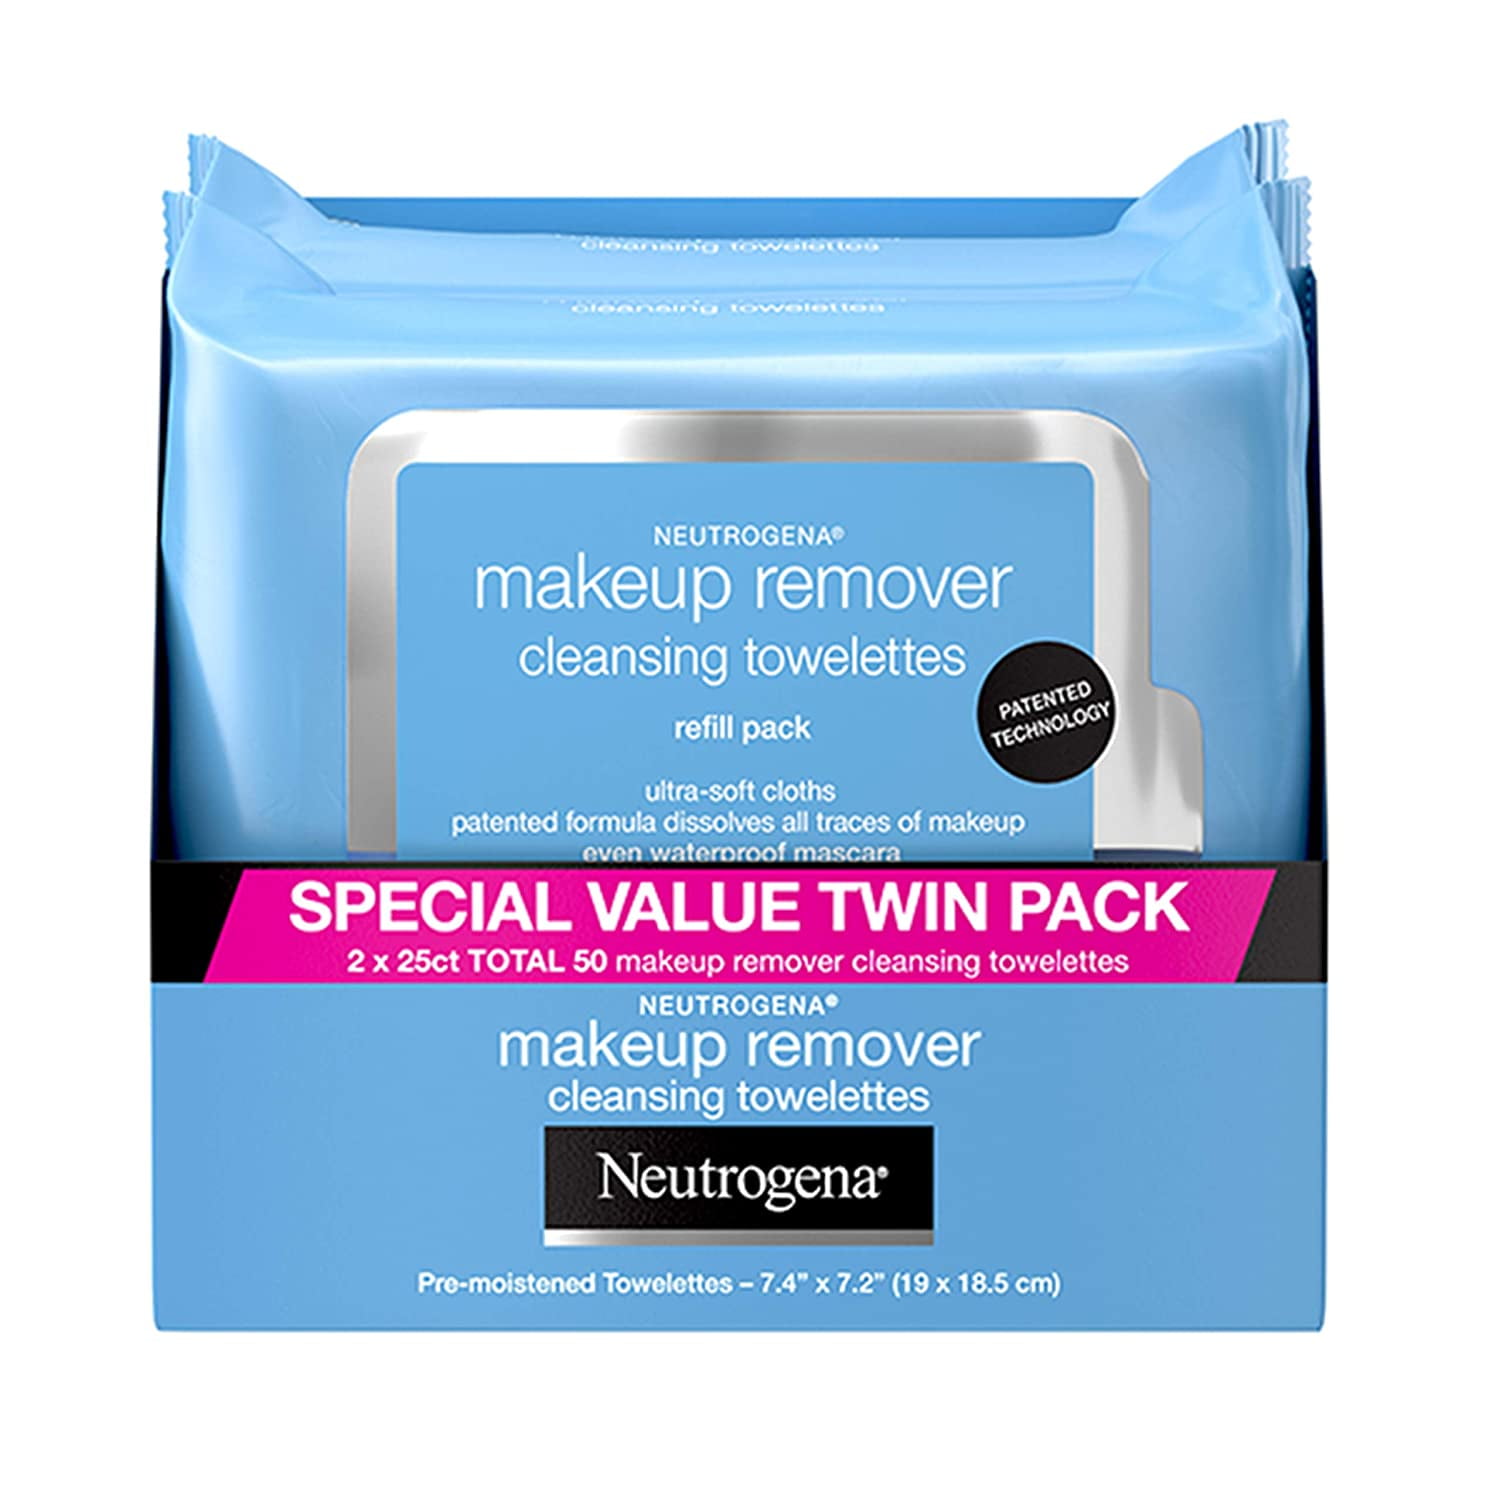 Neutrogena Makeup Remover Cleansing Face Wipes, Daily Cleansing Facial  Towelettes to Remove Waterproof Makeup and Mascara, Alcohol-Free, Value  Twin Pack, 25 count, 2 Pack - Walmart.com